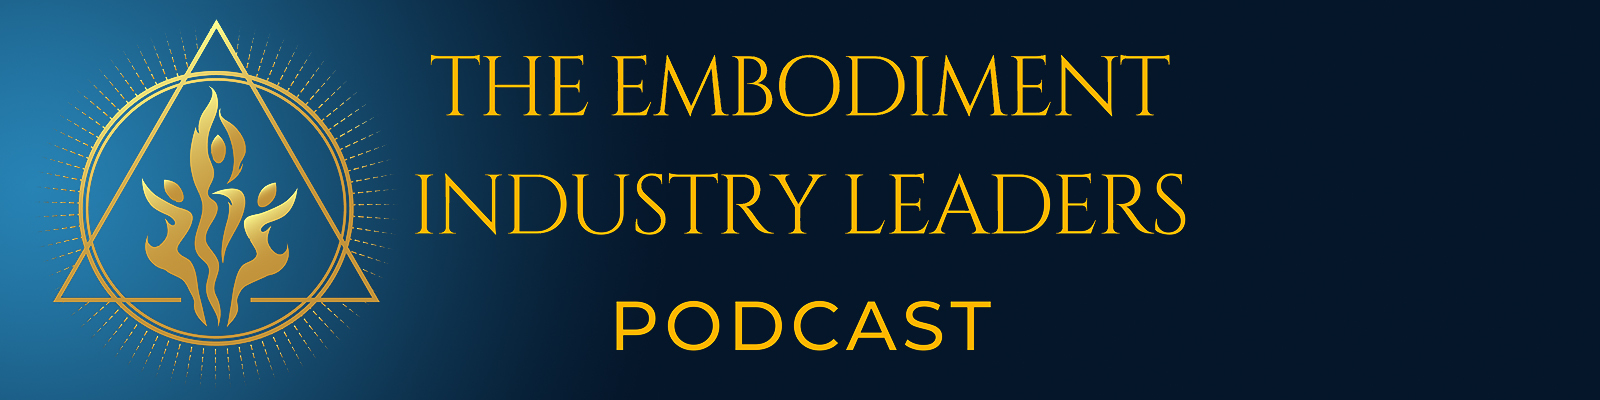 The Embodiment Industry Leaders Podcast